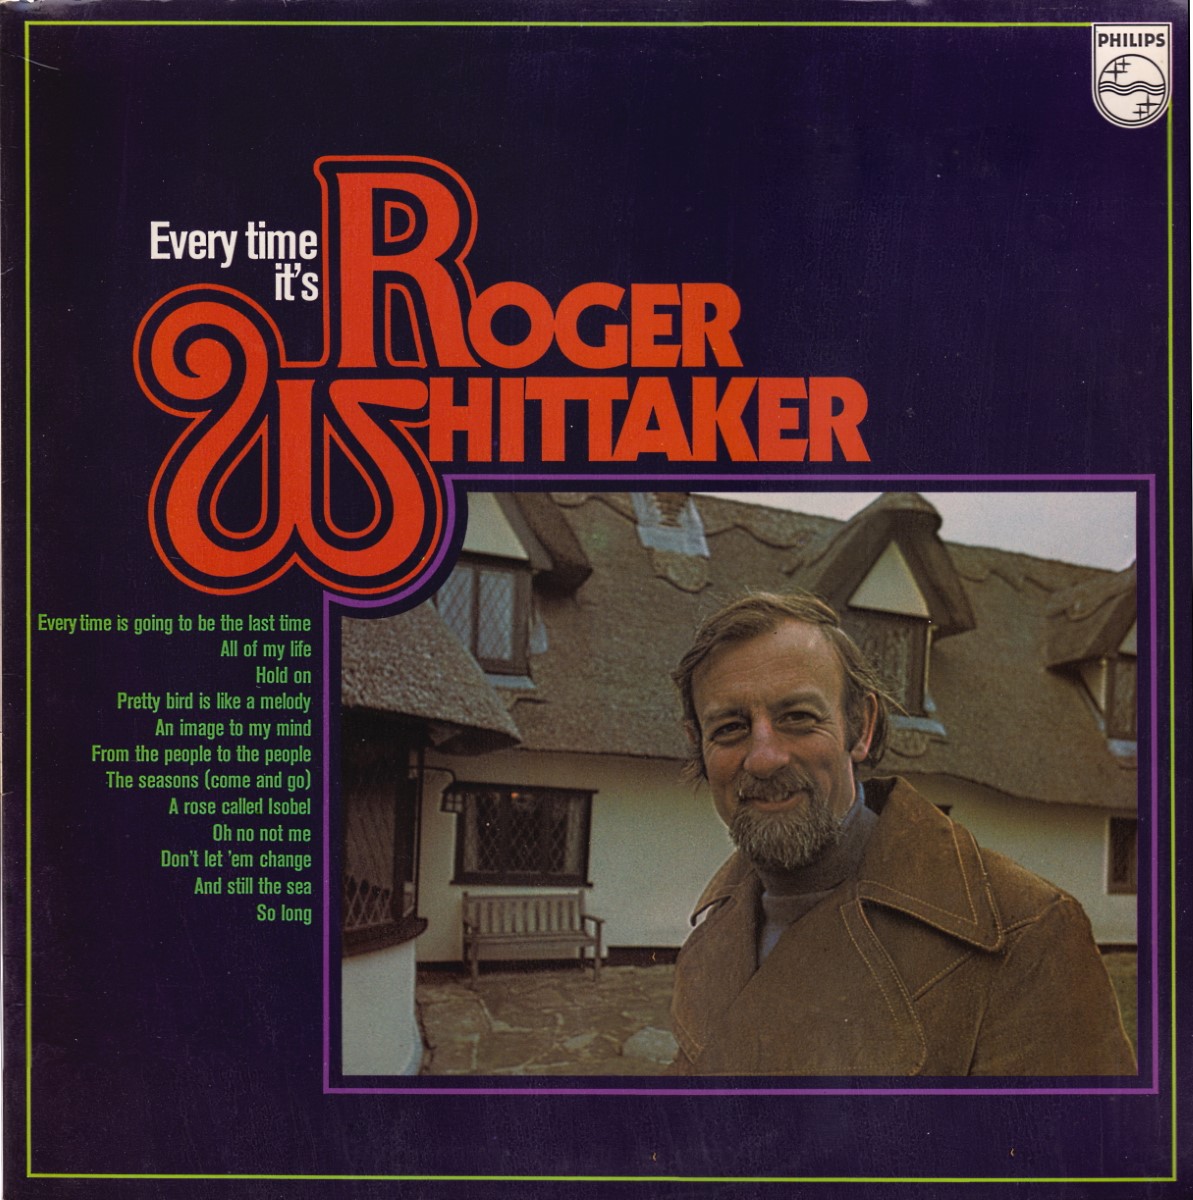 Roger Whittaker - Every Time It's Roger Whittaker (1974)